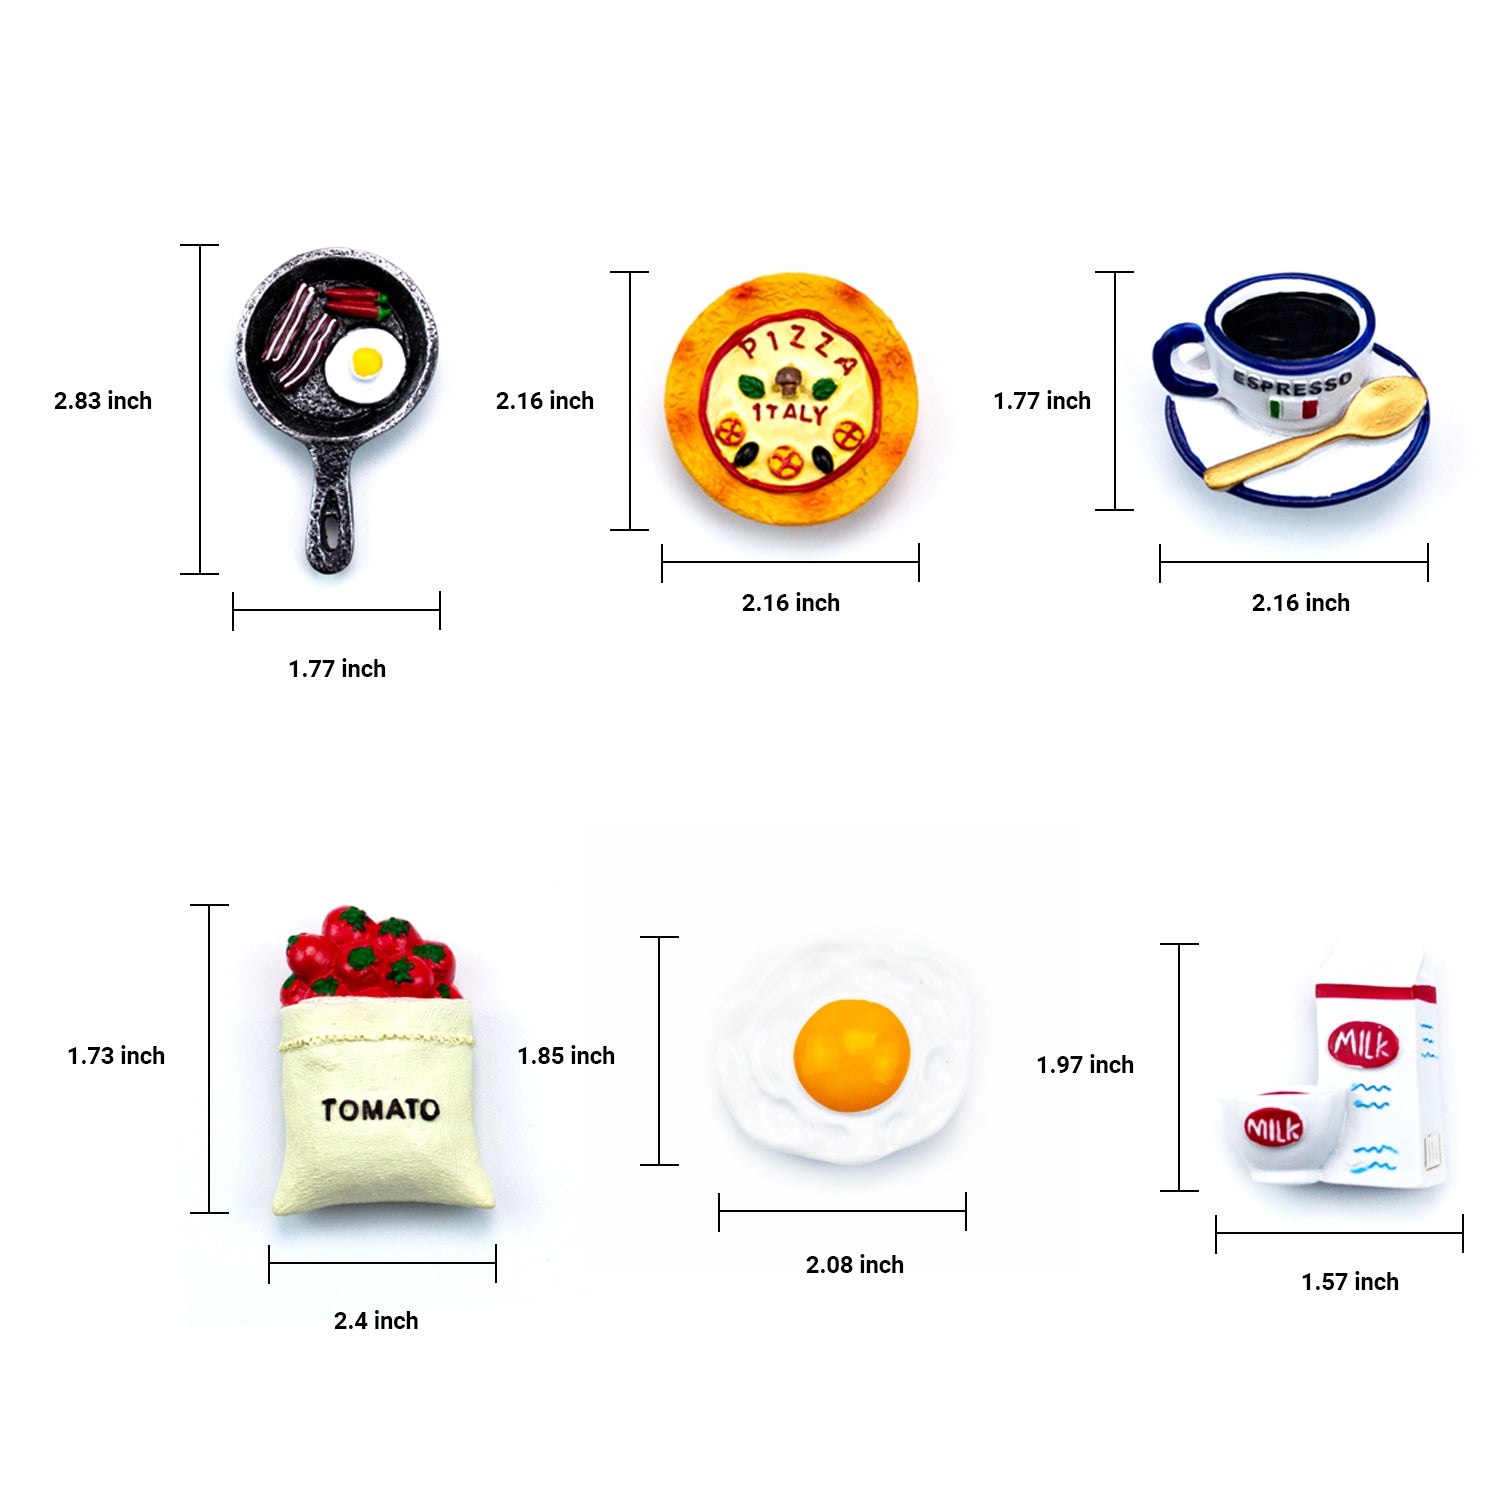 Refrigerator Magnets 13pcs Food Theme for Food Lover, Cute and Funny, 13pcs-Set